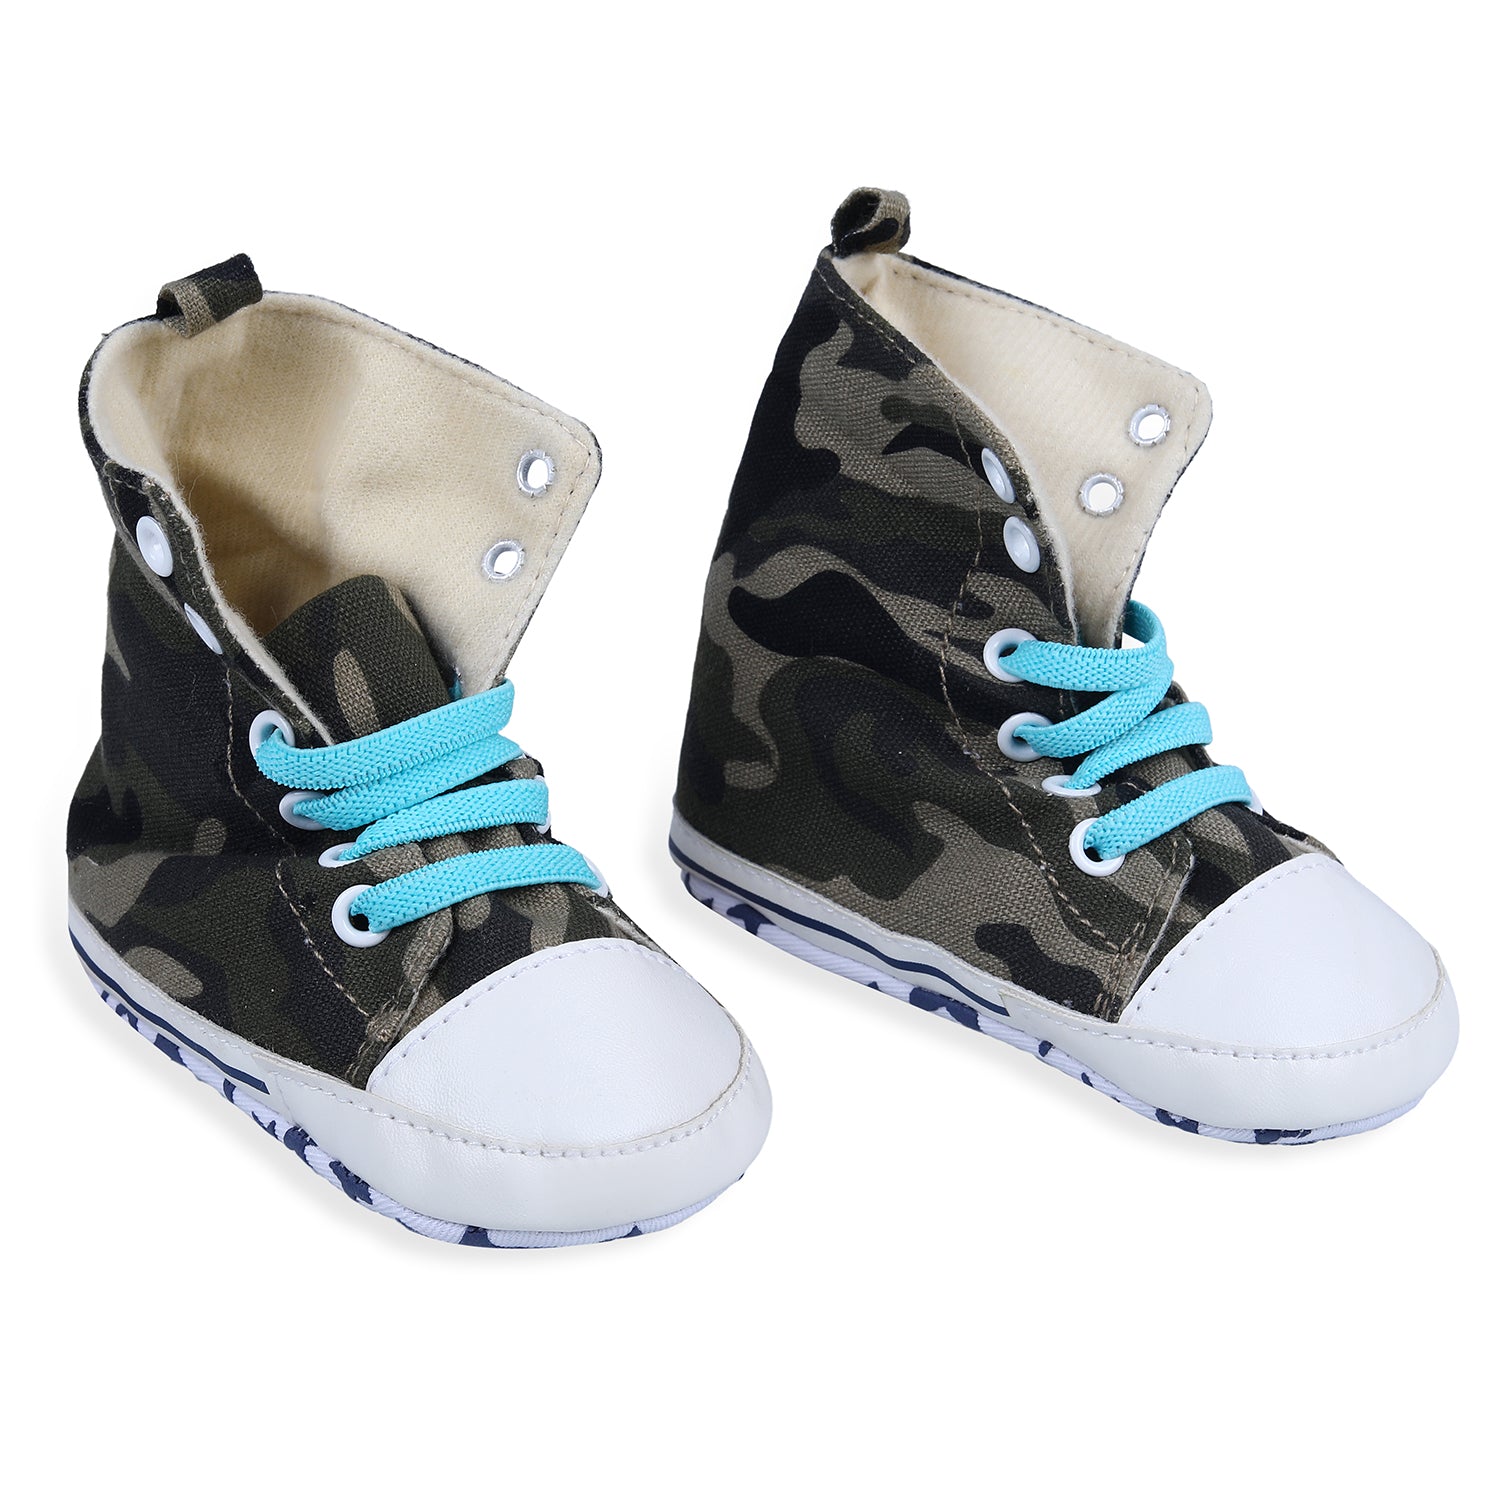 Military High Top Foldable Casual Sneaker Booties - Multicolour - Baby Moo